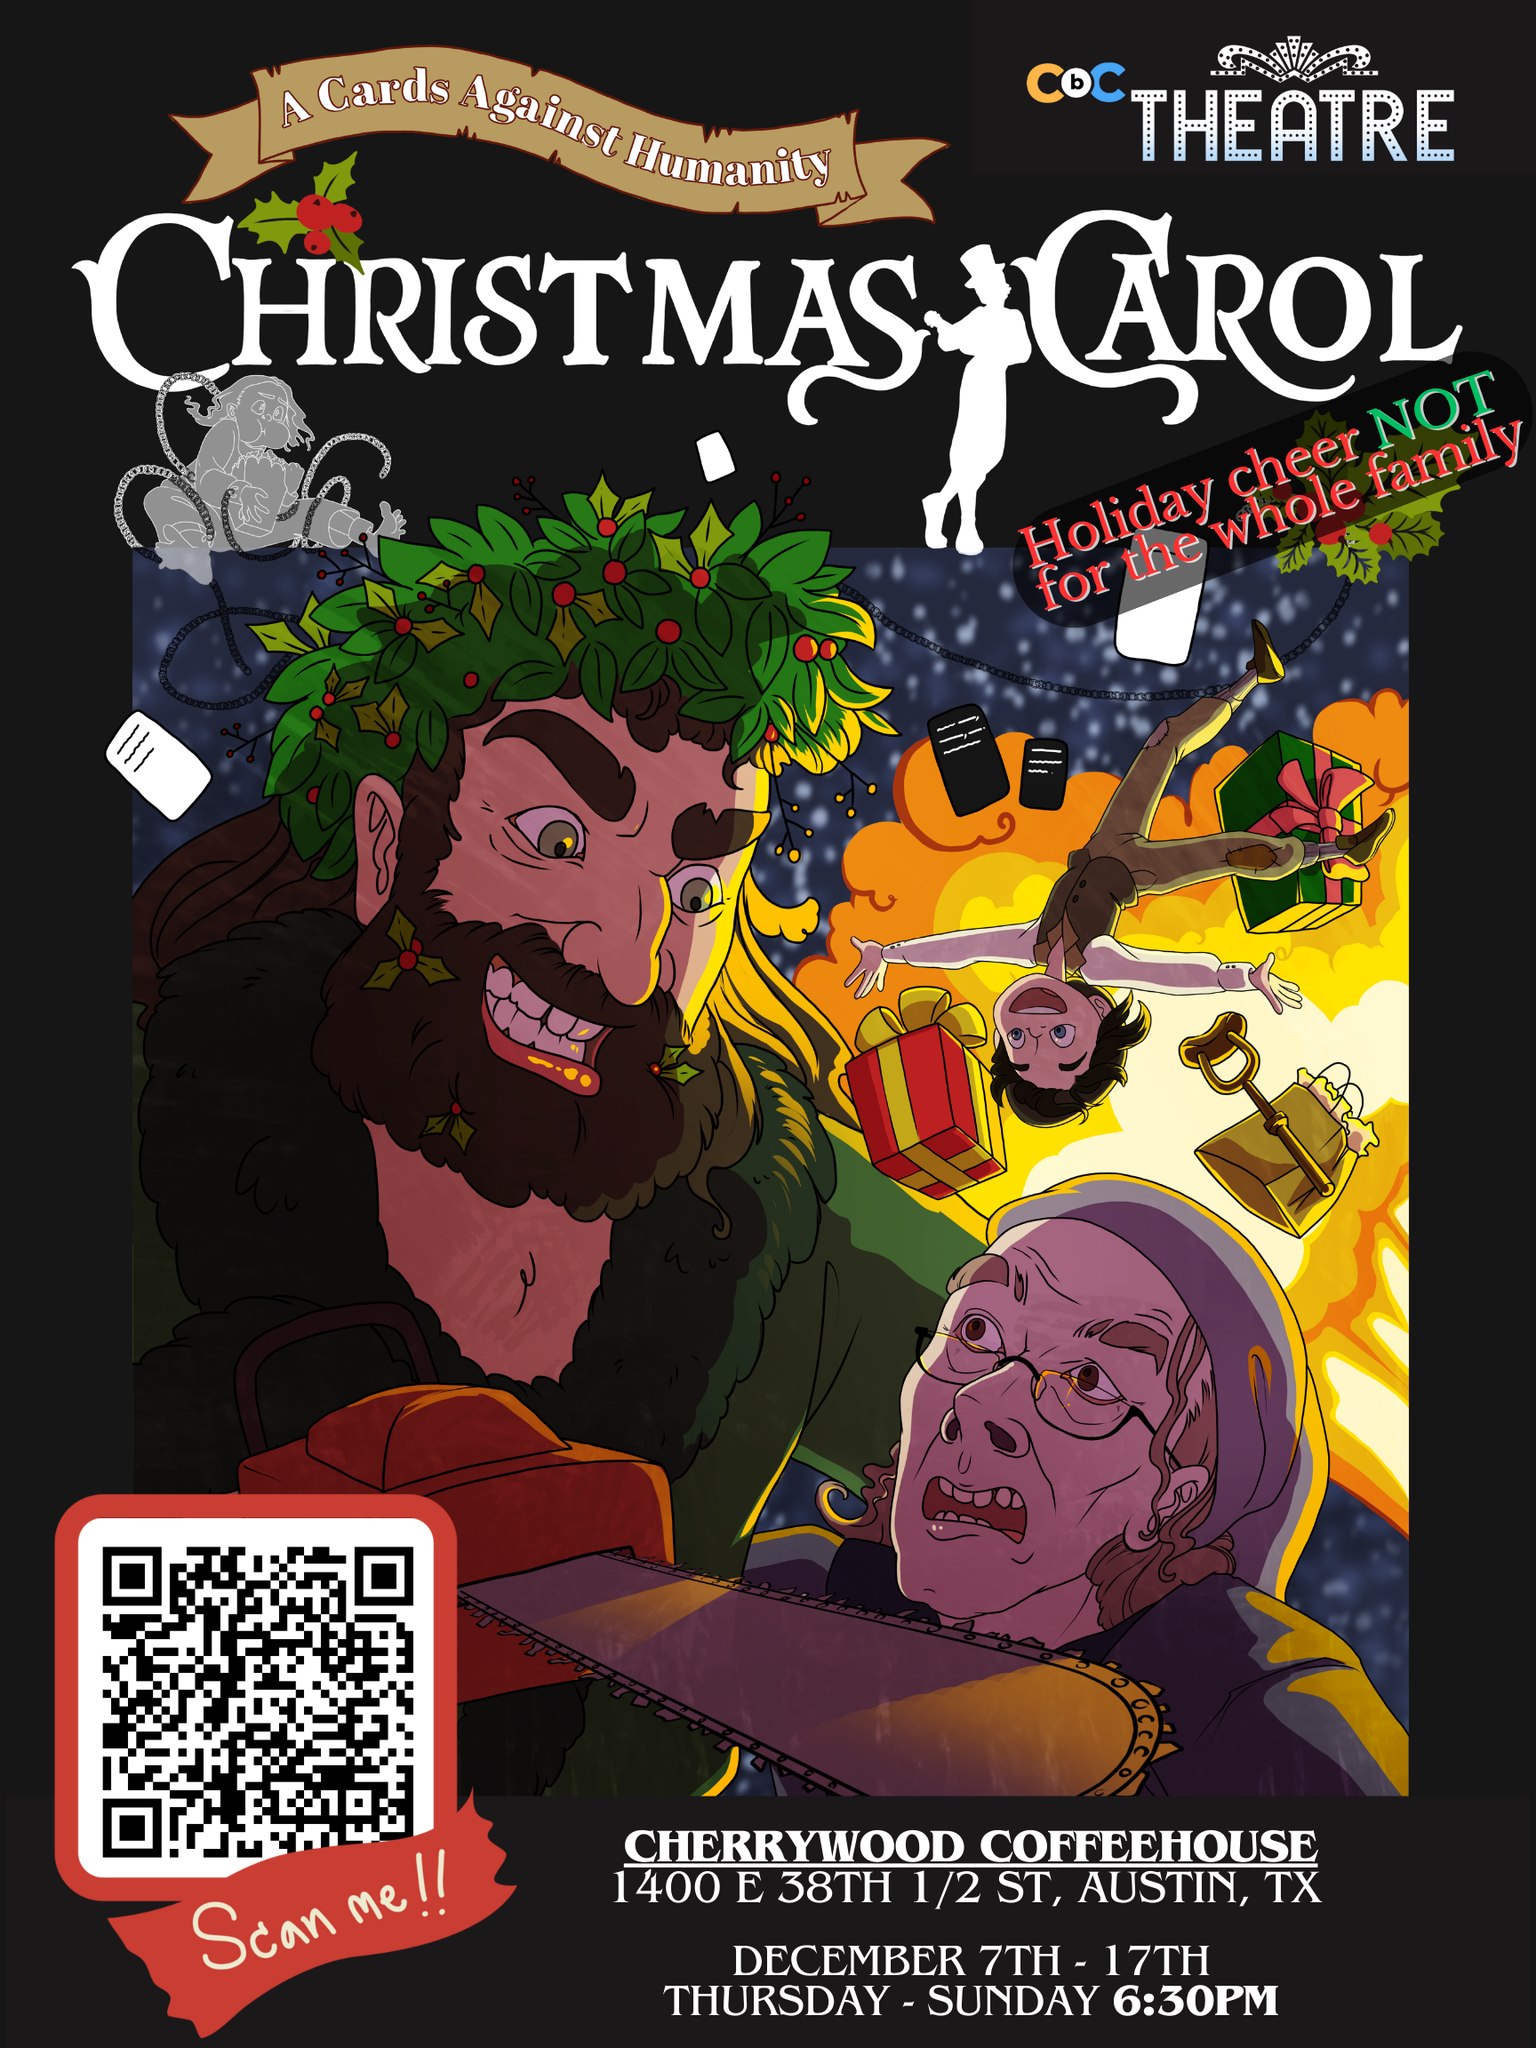 A Cards against Humanity Christmas Carol by Communication by Captivation